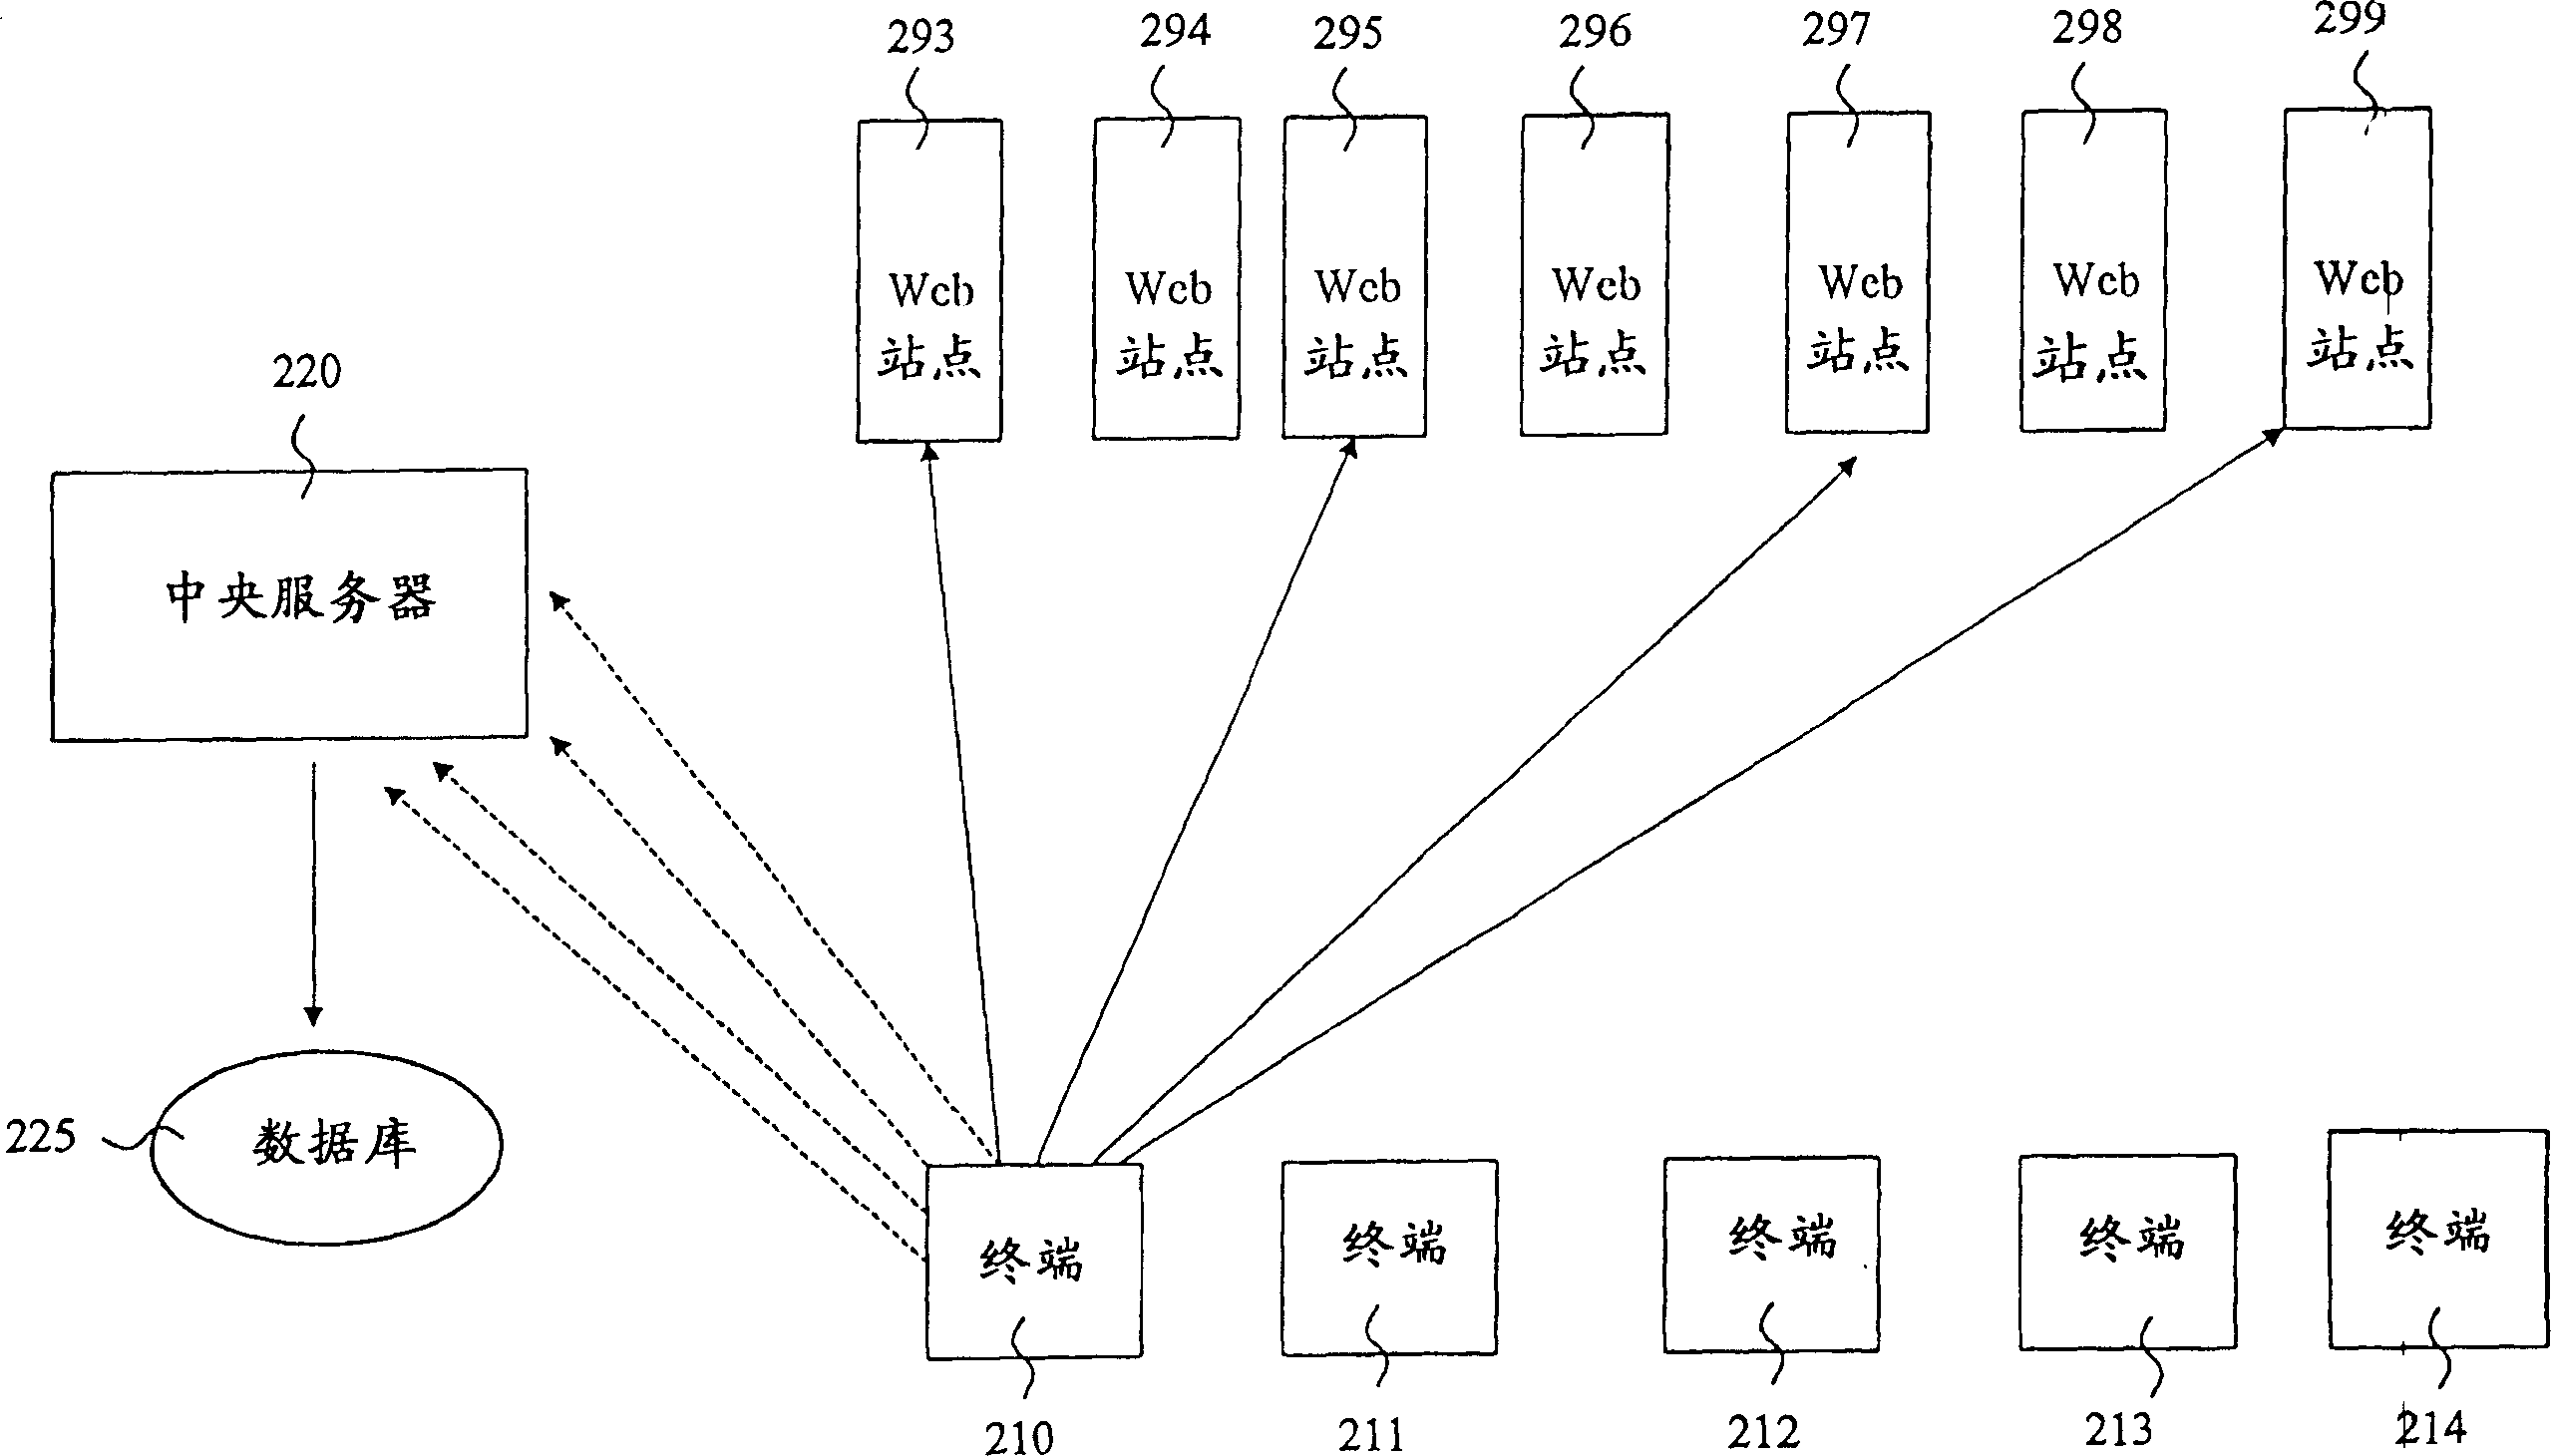 Distributed monitoring system providing knowledge services